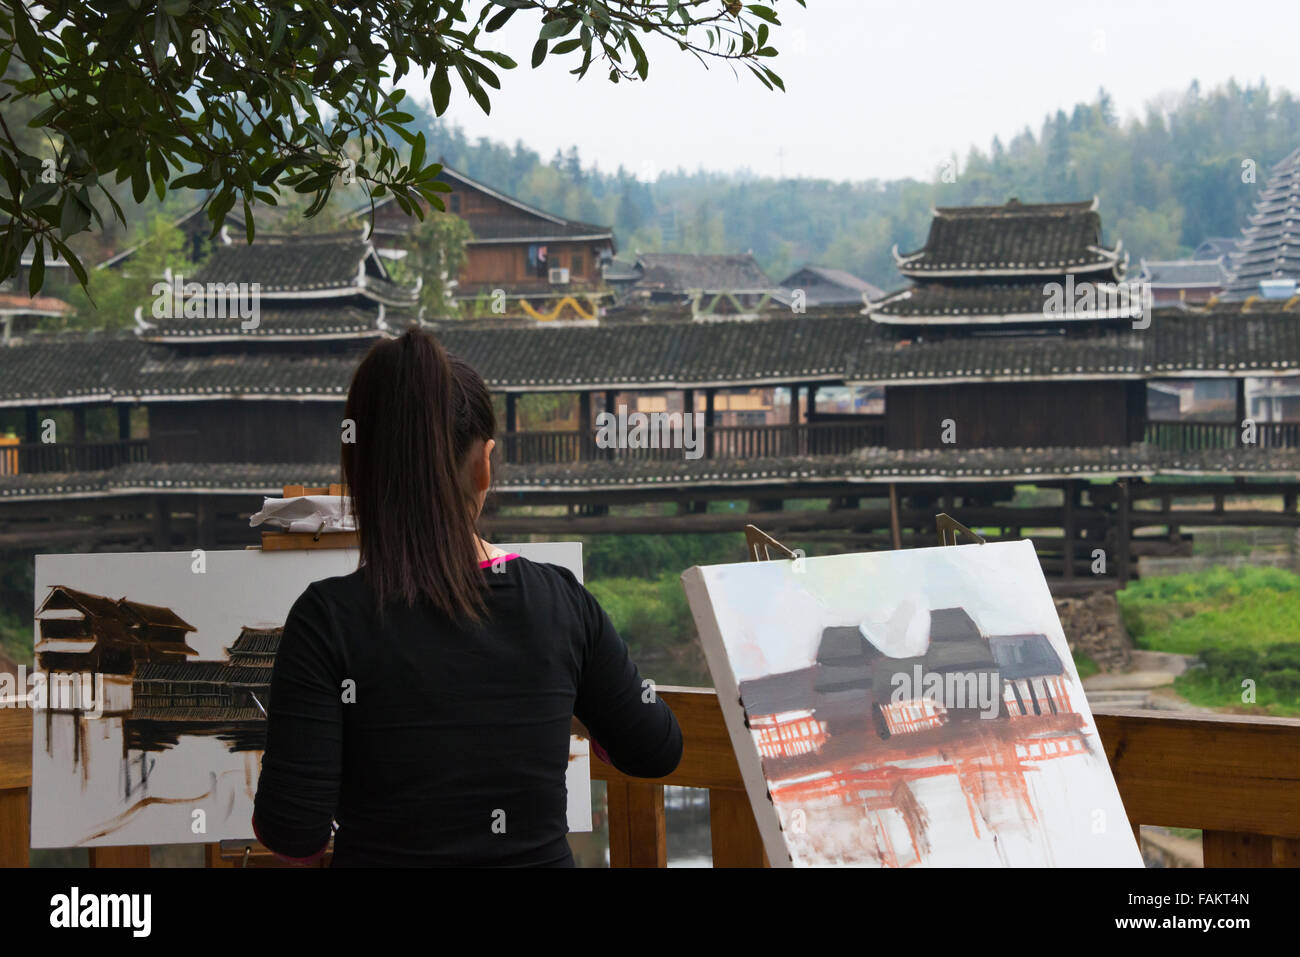 Girl painting by Dong styled Wind-An-Rain bridge, Chengyang Scenic Area, Sanjiang, Guangxi Province, China Stock Photo